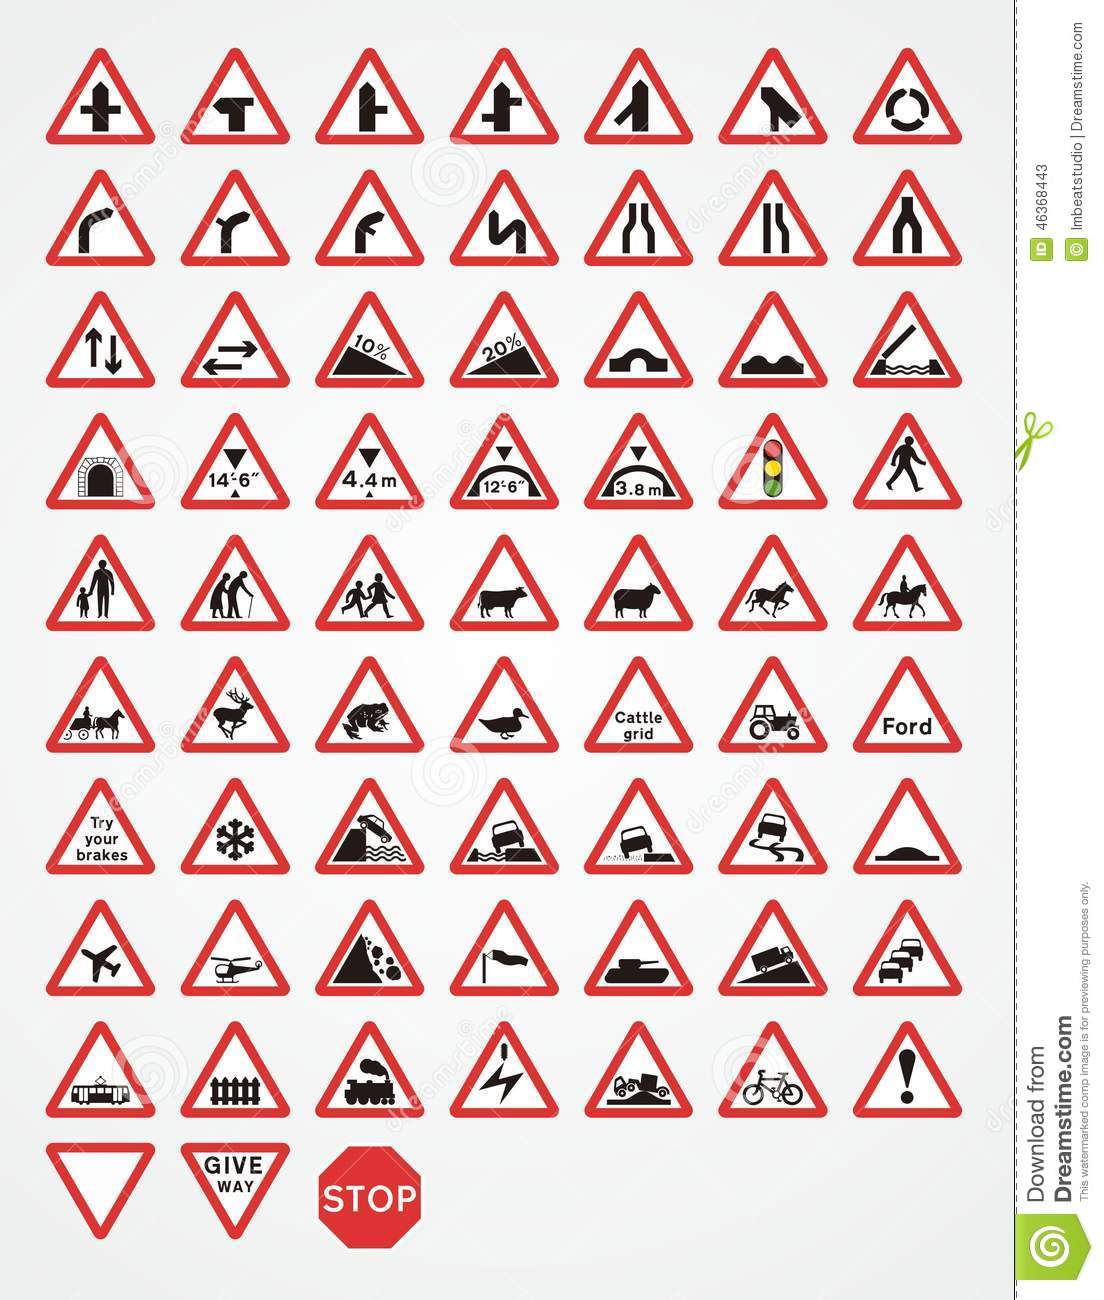 Warning Signs Are Used To Alert Drivers Topotential Danger Ahead  They